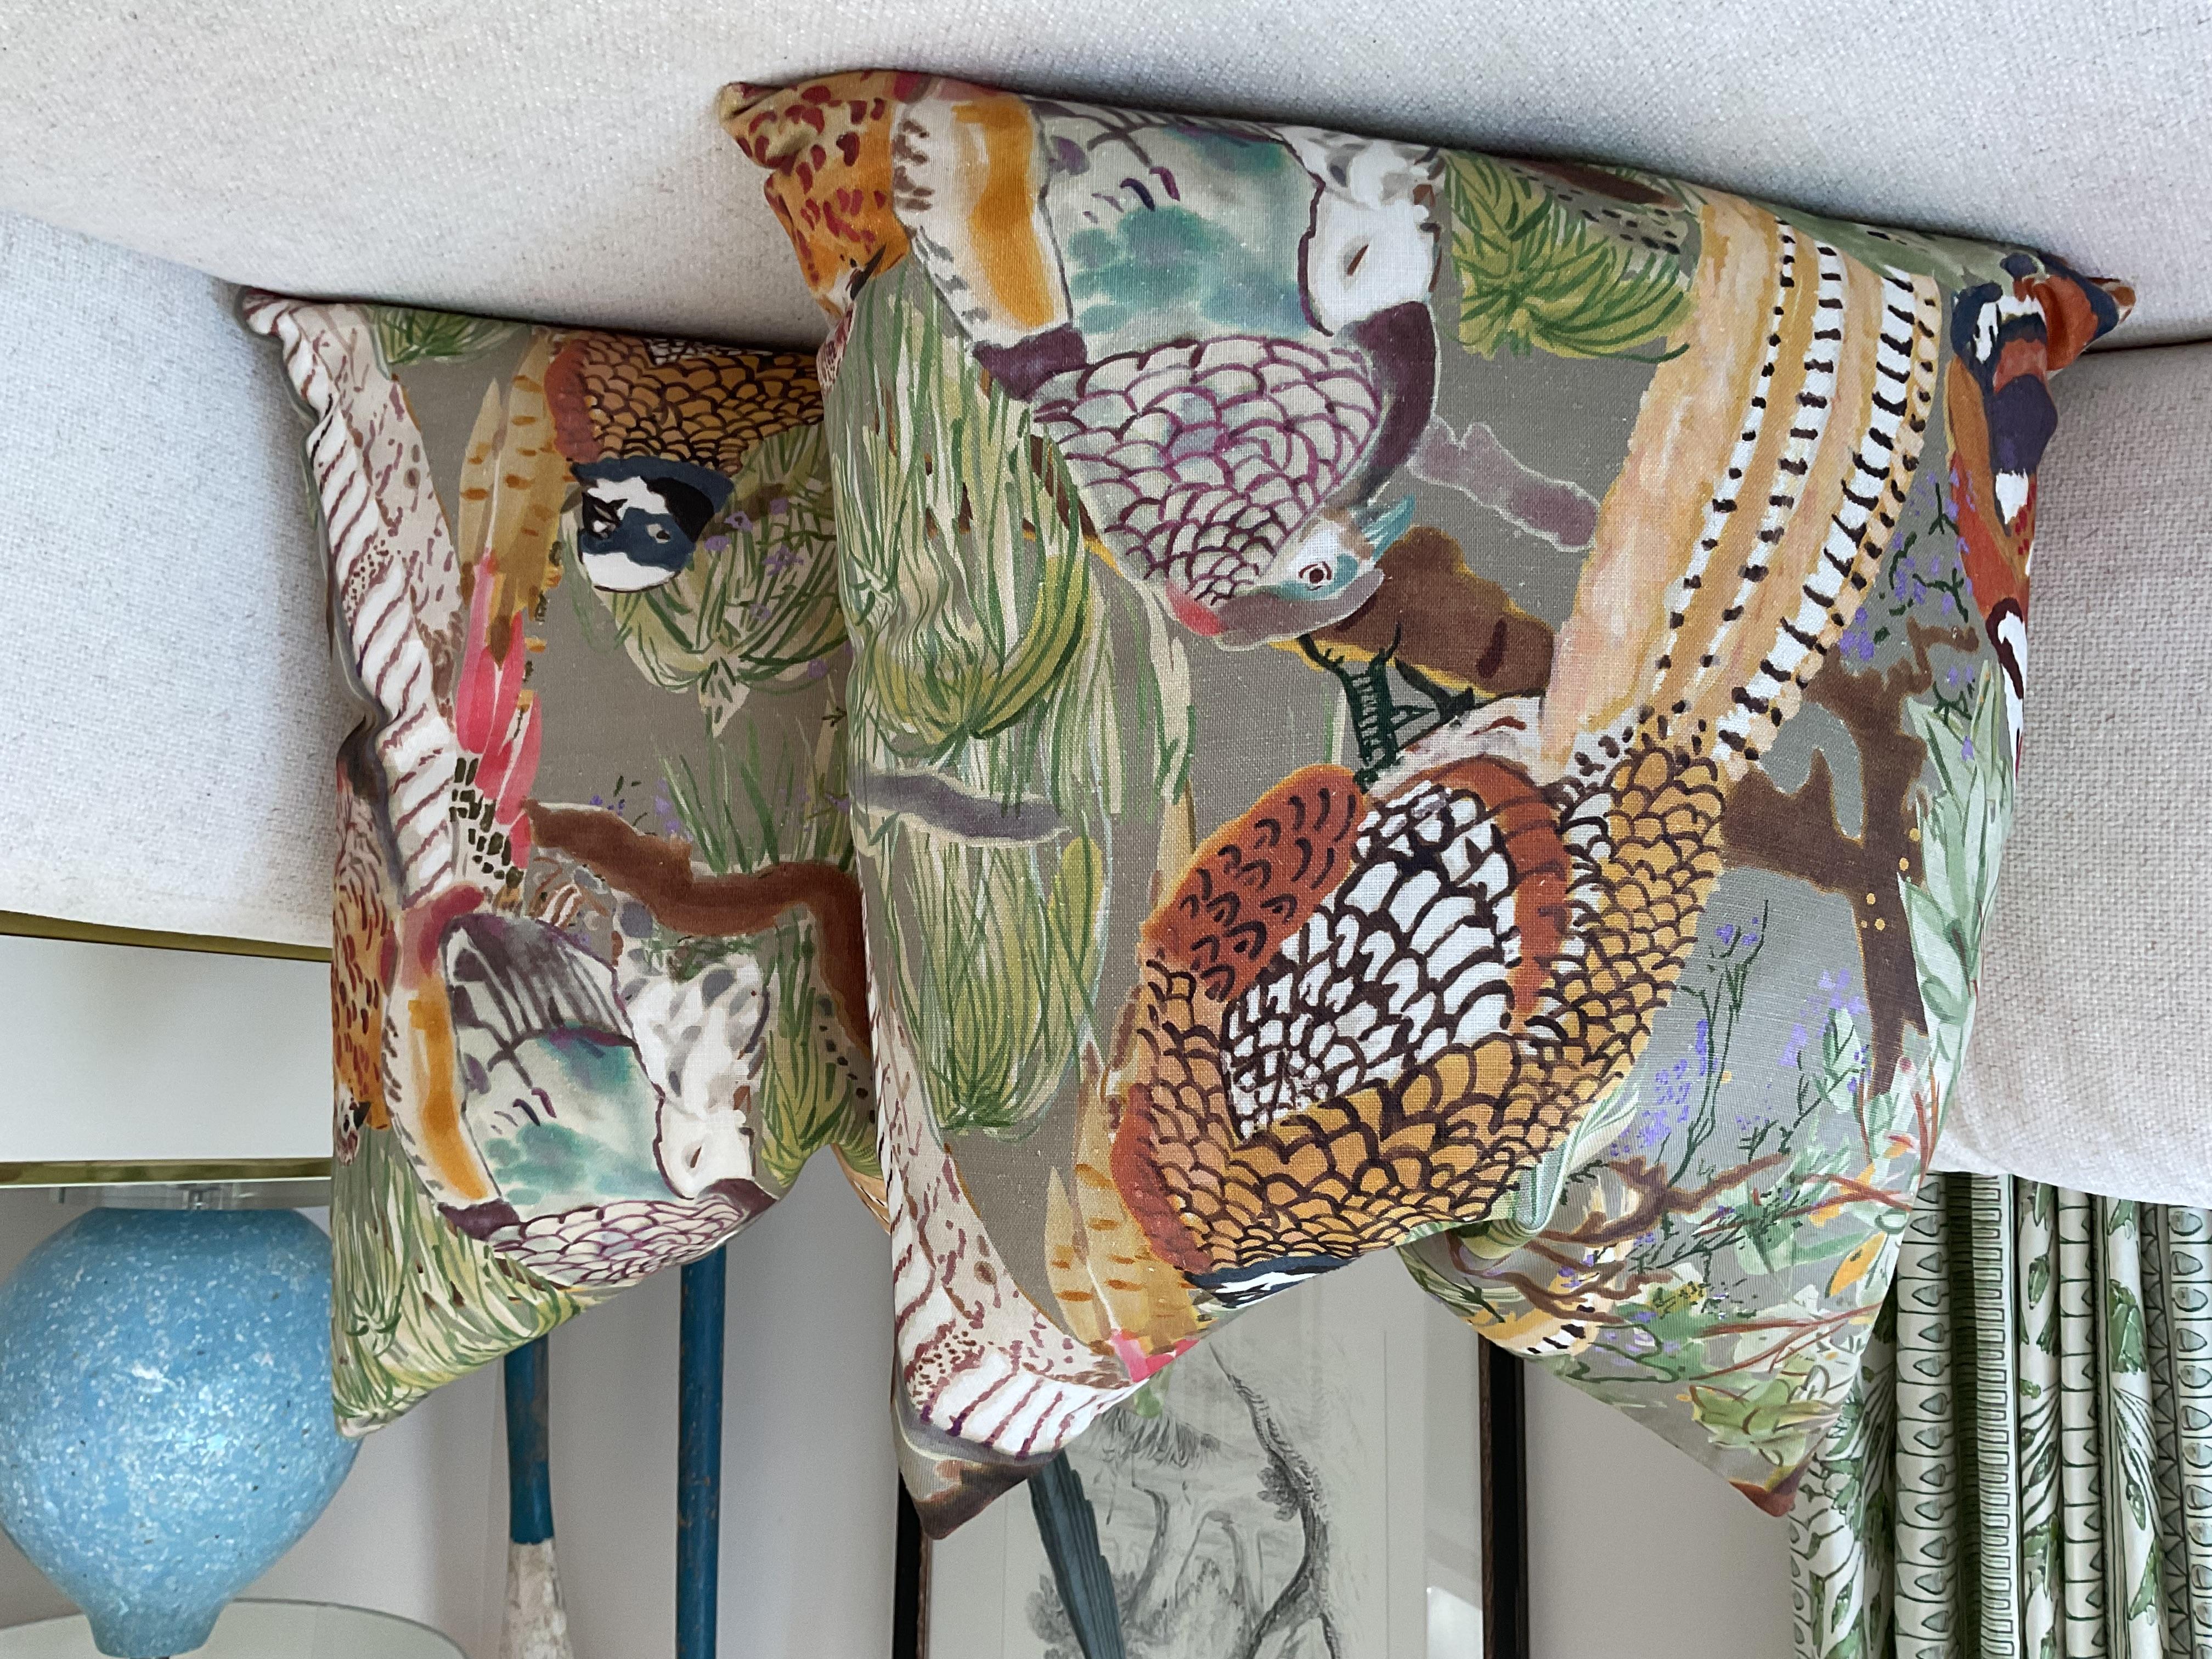 Beautiful pair of complete covers with down inserts done in Mulberry linen fabric by Lee Jofa. This fabric depicts glorious game birds in rich swirling shades of cinnamon brown and tan, punctuated with greens, aqua, pink and yellow. Backing will be